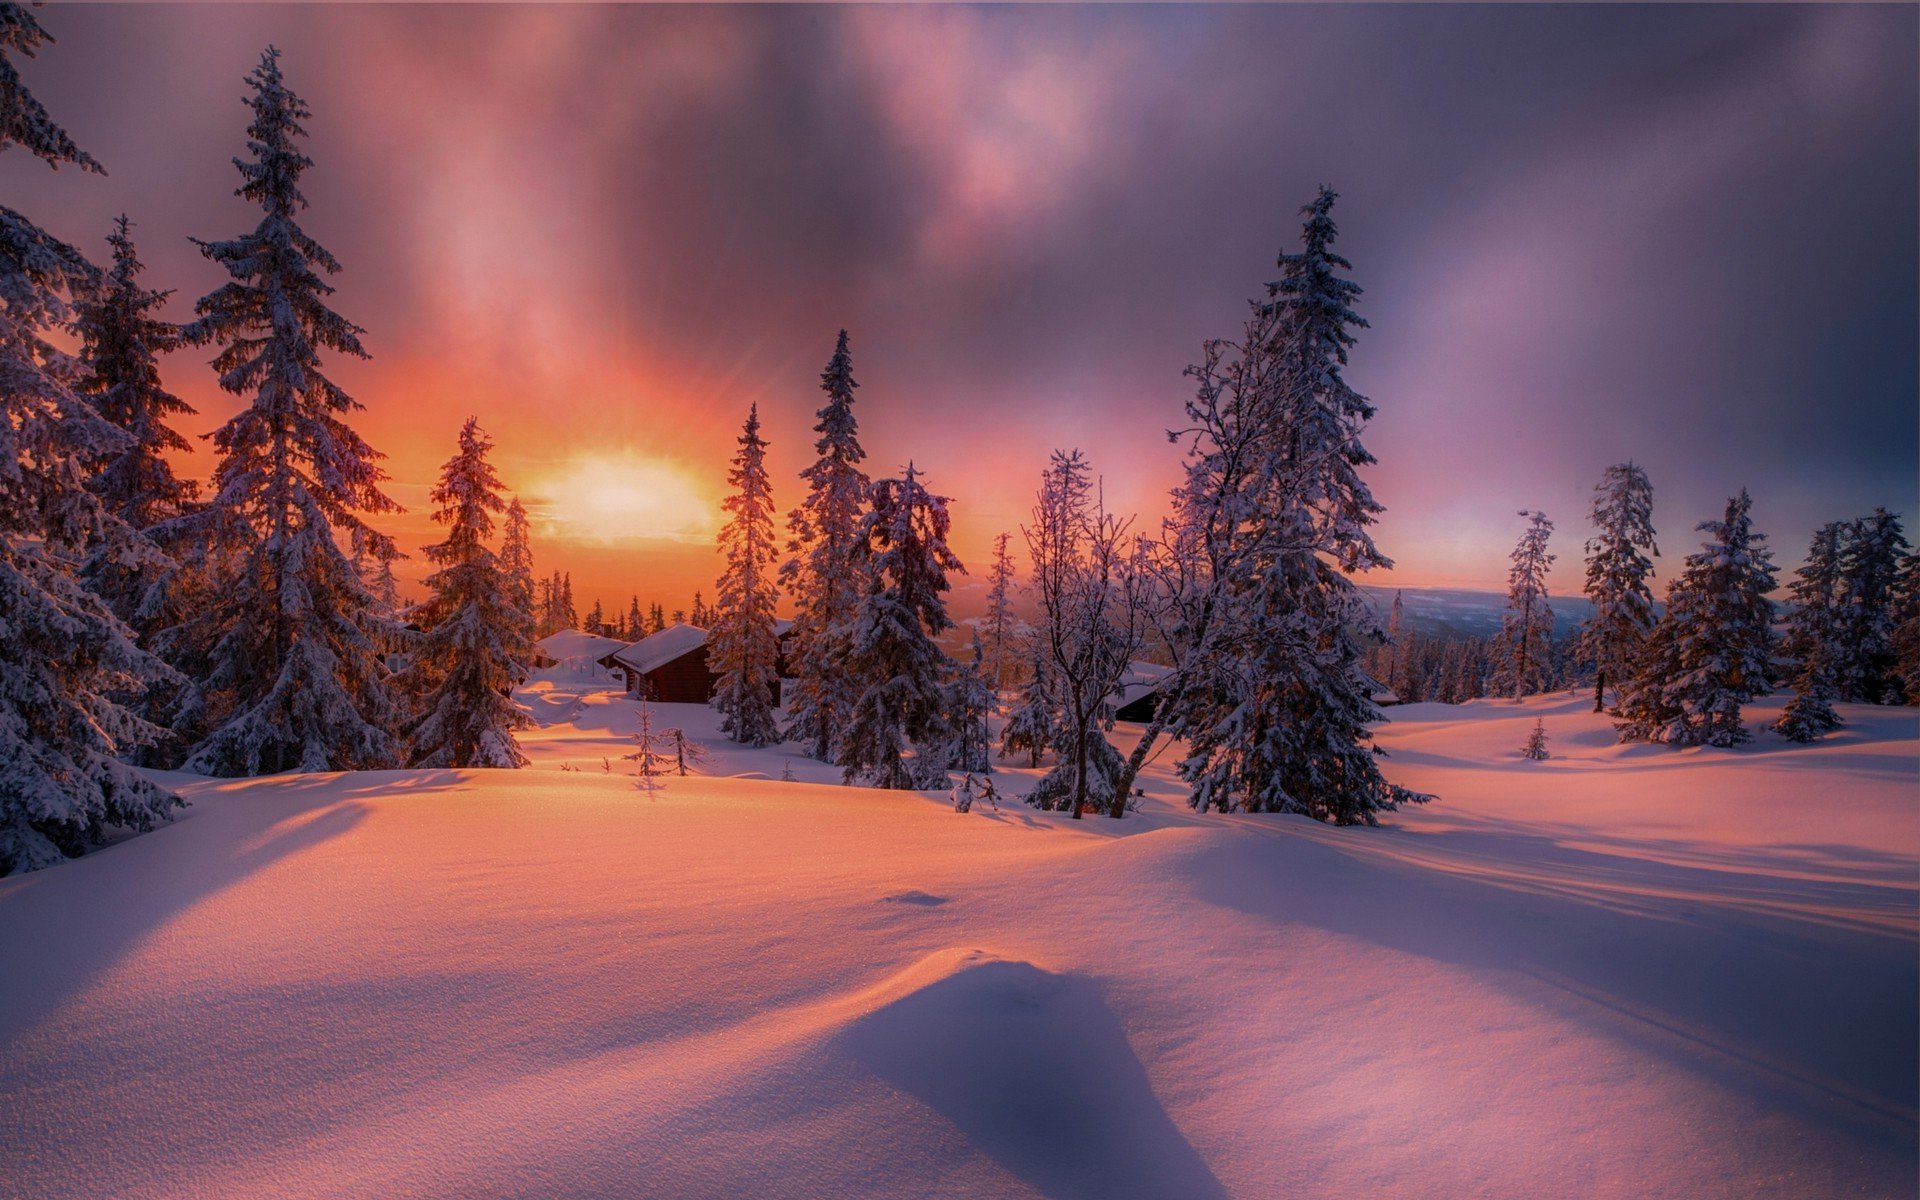 Wallpaper, sunlight, trees, landscape, forest, white, sunset, nature, red, sky, snow, winter, clouds, sunrise, yellow, ice, cold, Norway, evening, morning, frost, horizon, spruce, atmosphere, Arctic, dusk, fir, Freezing, cottage, conifer, light